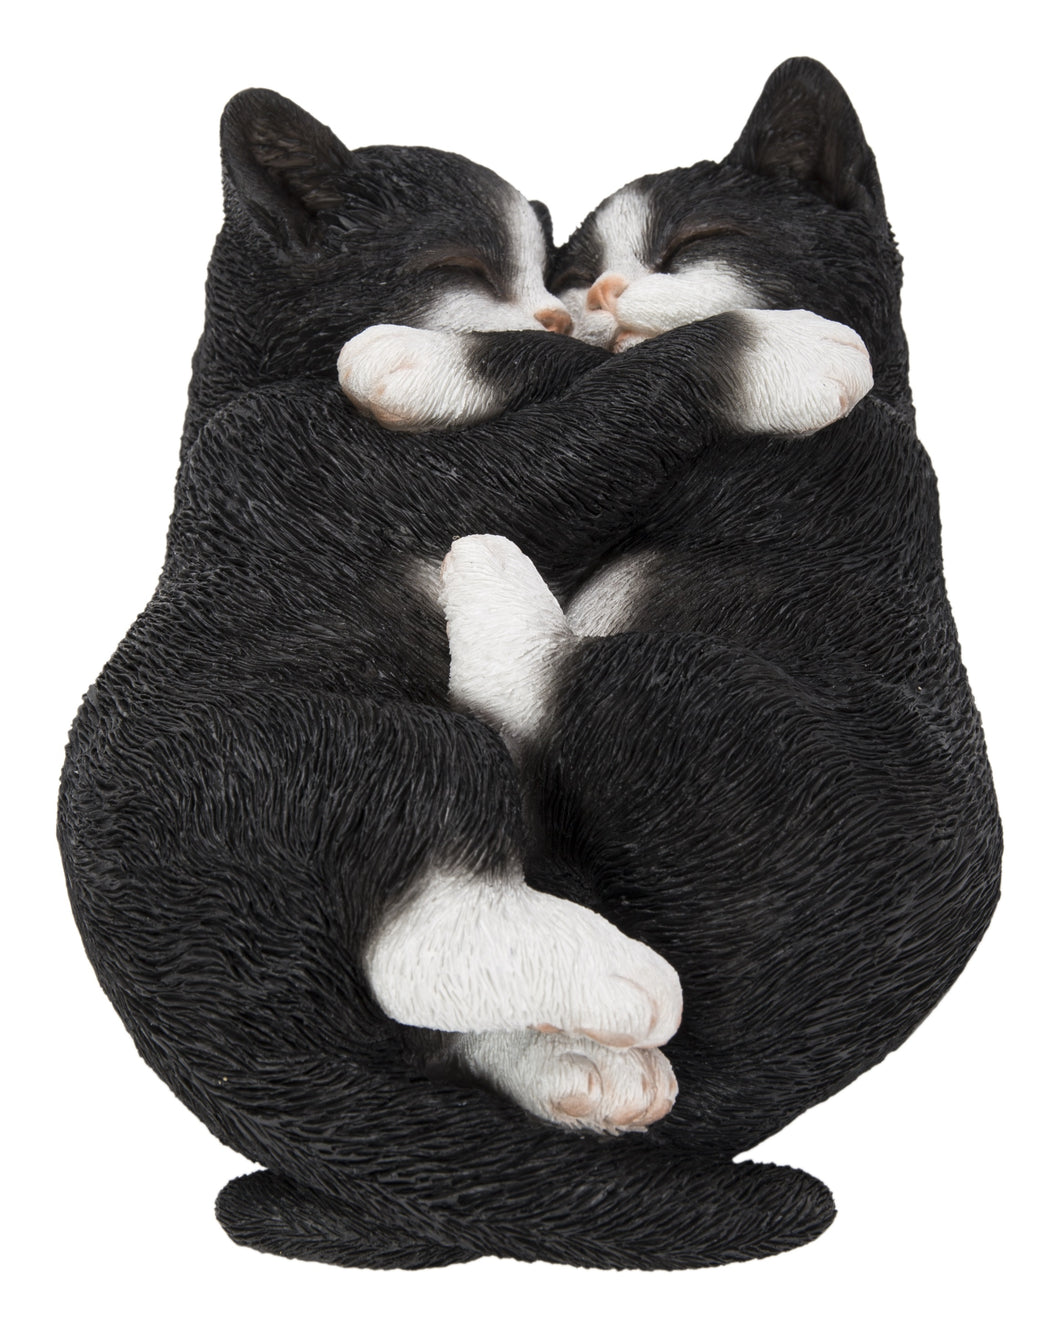 SLEEPING COUPLE CATS - BLACK AND WHITE